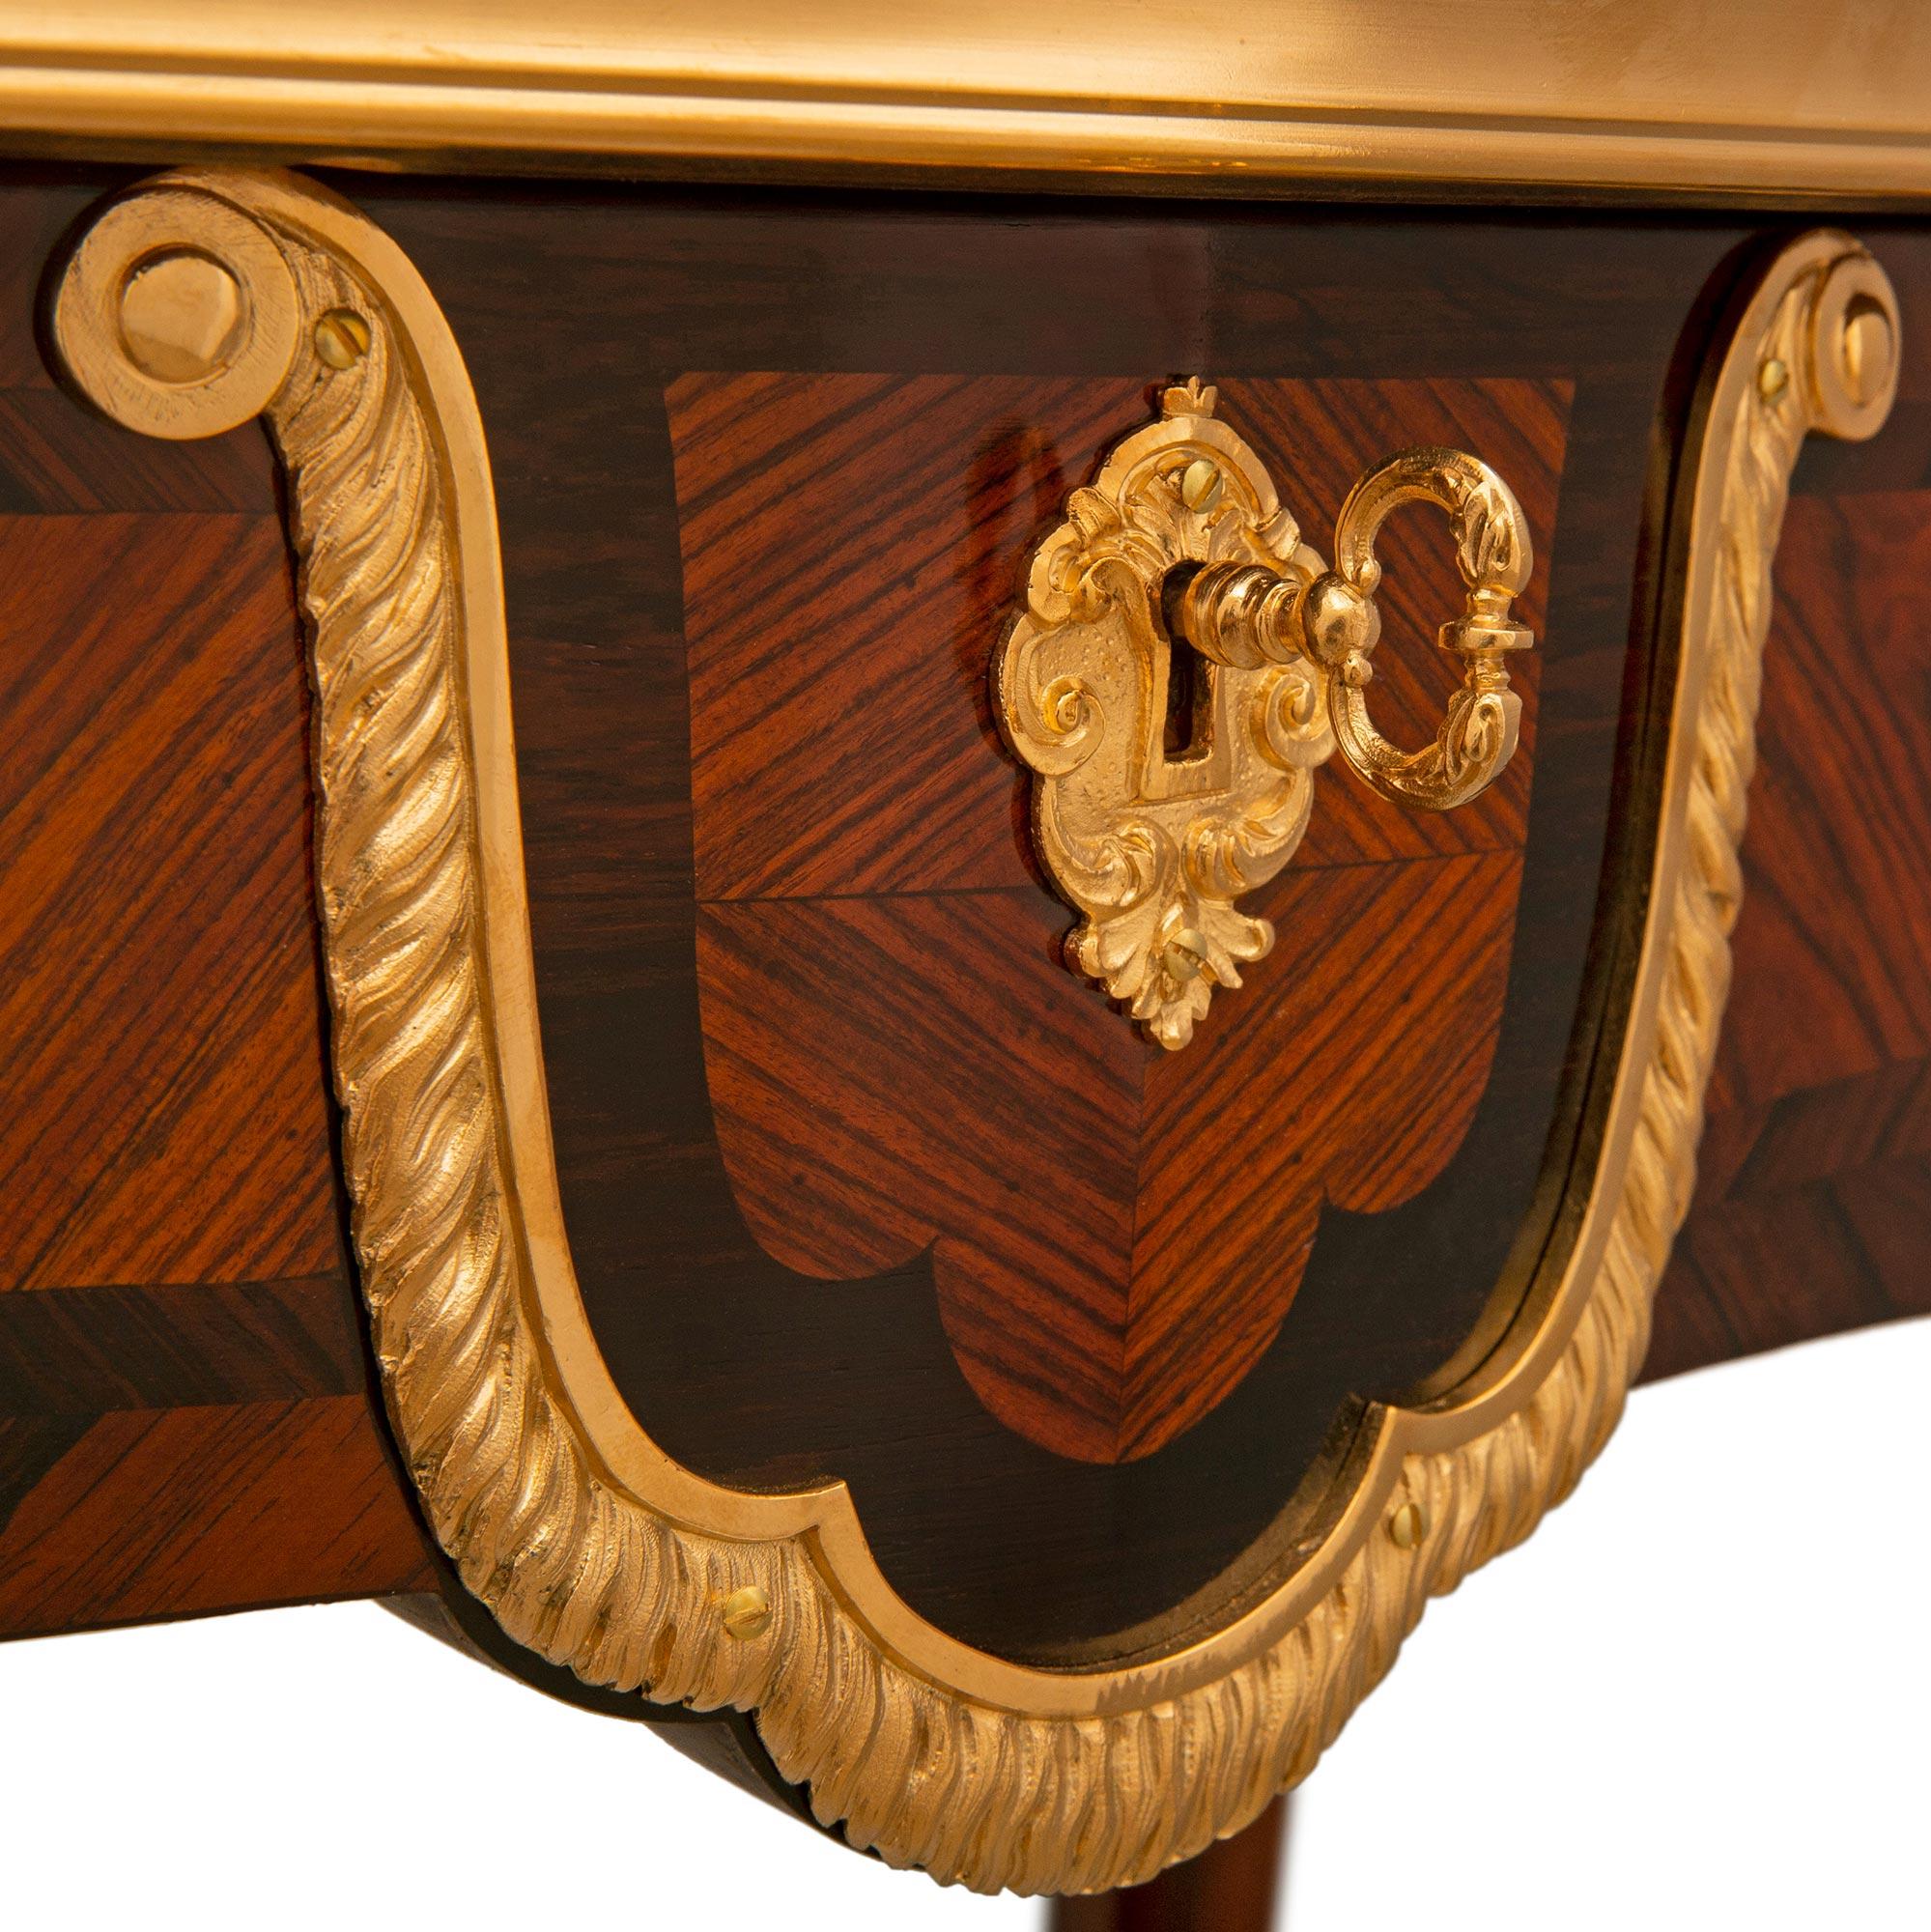 French 19th Century Belle Epoque Period Tulipwood, Kingwood & Ormolu Side Table For Sale 4